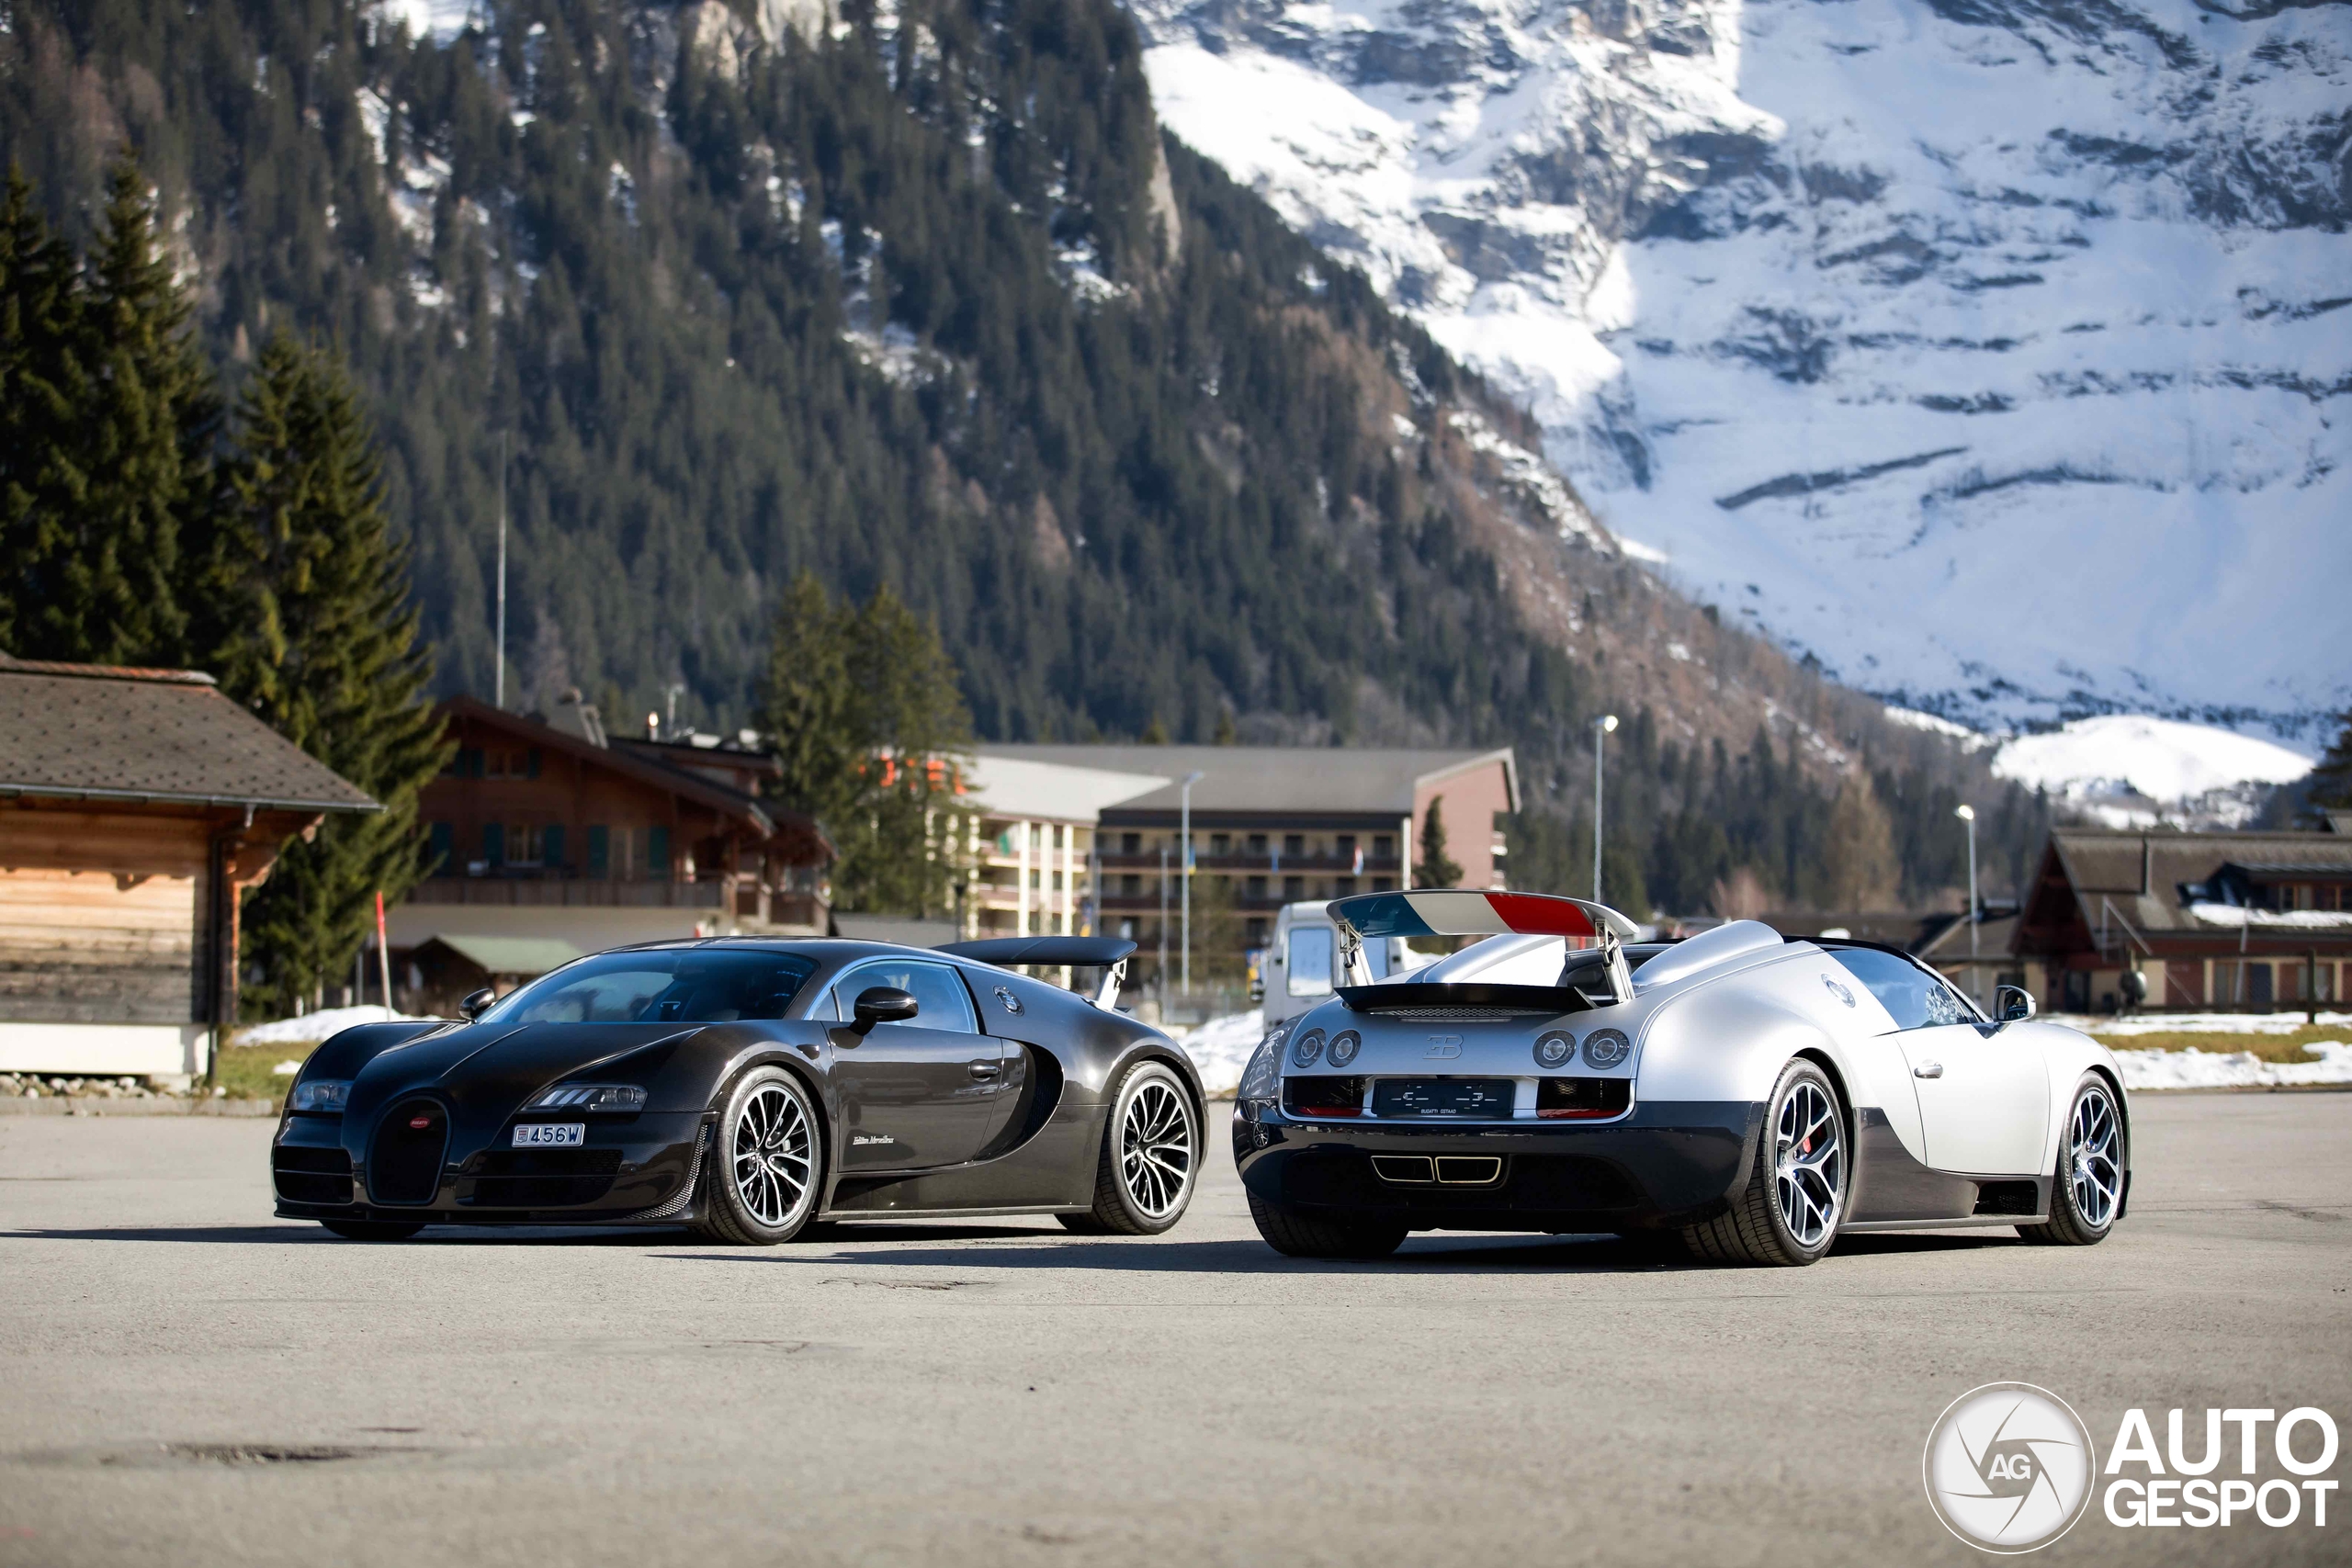 Another Bugatti combo in the Bernese alps